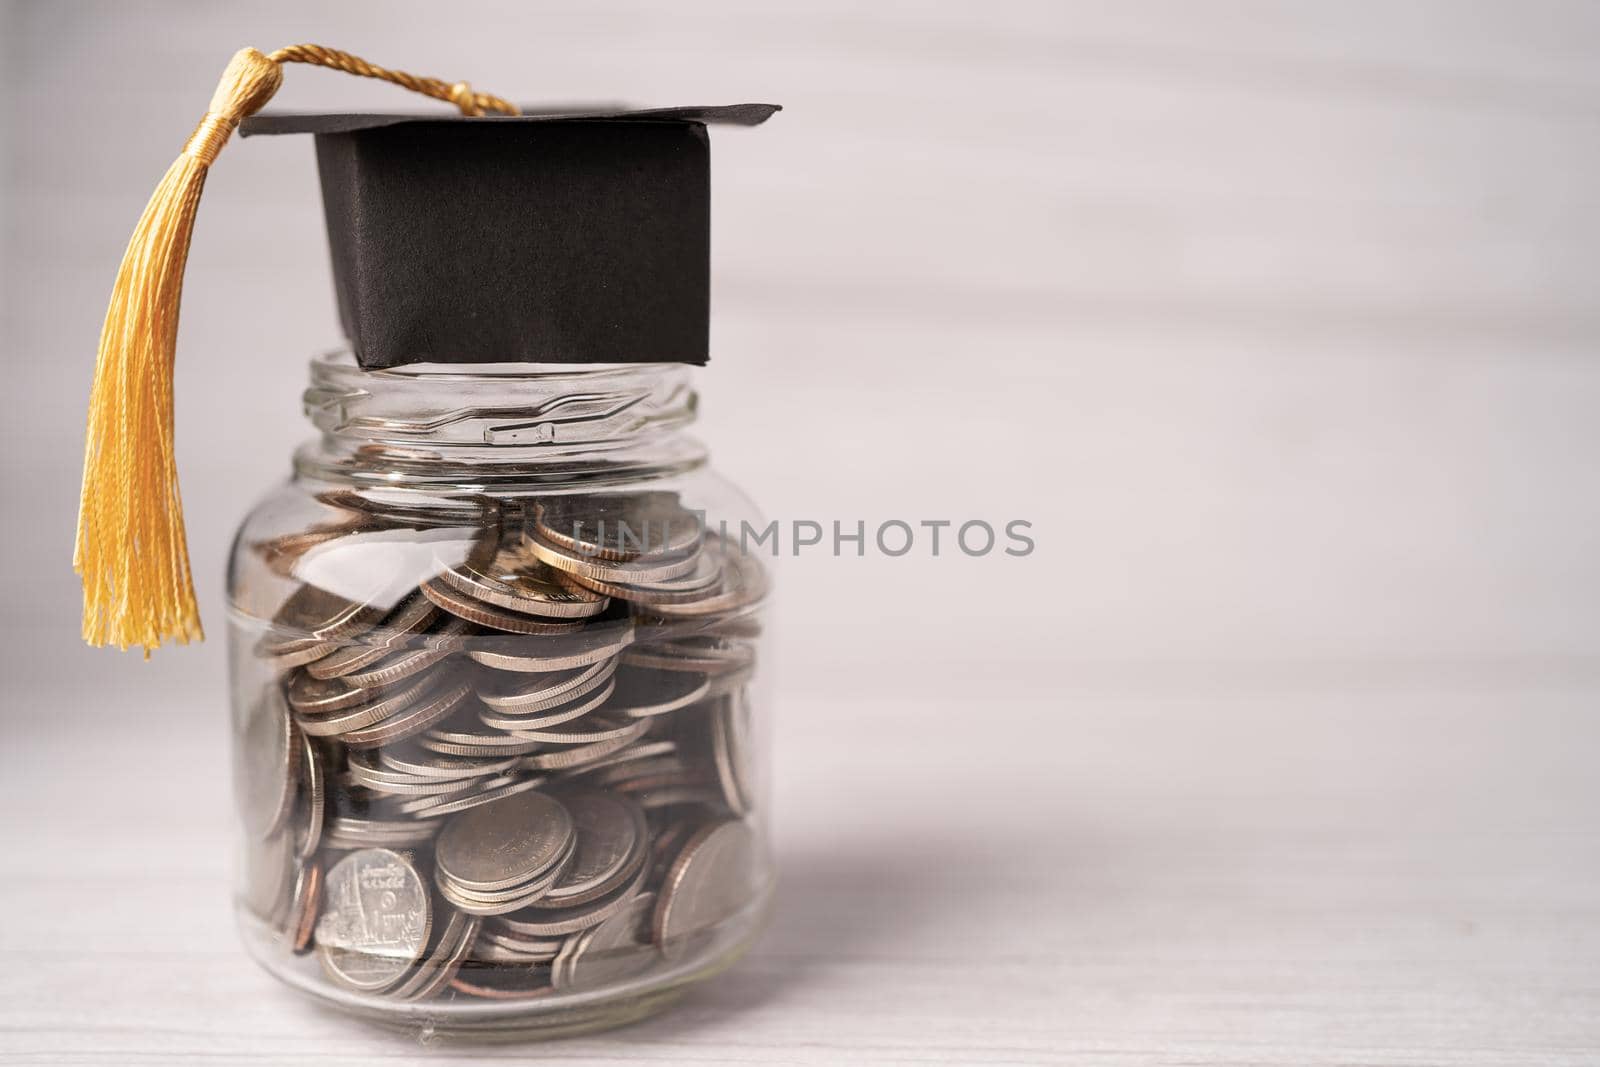 Graduation gap hat on coins money in jar for education fund; study learning concept. by pamai